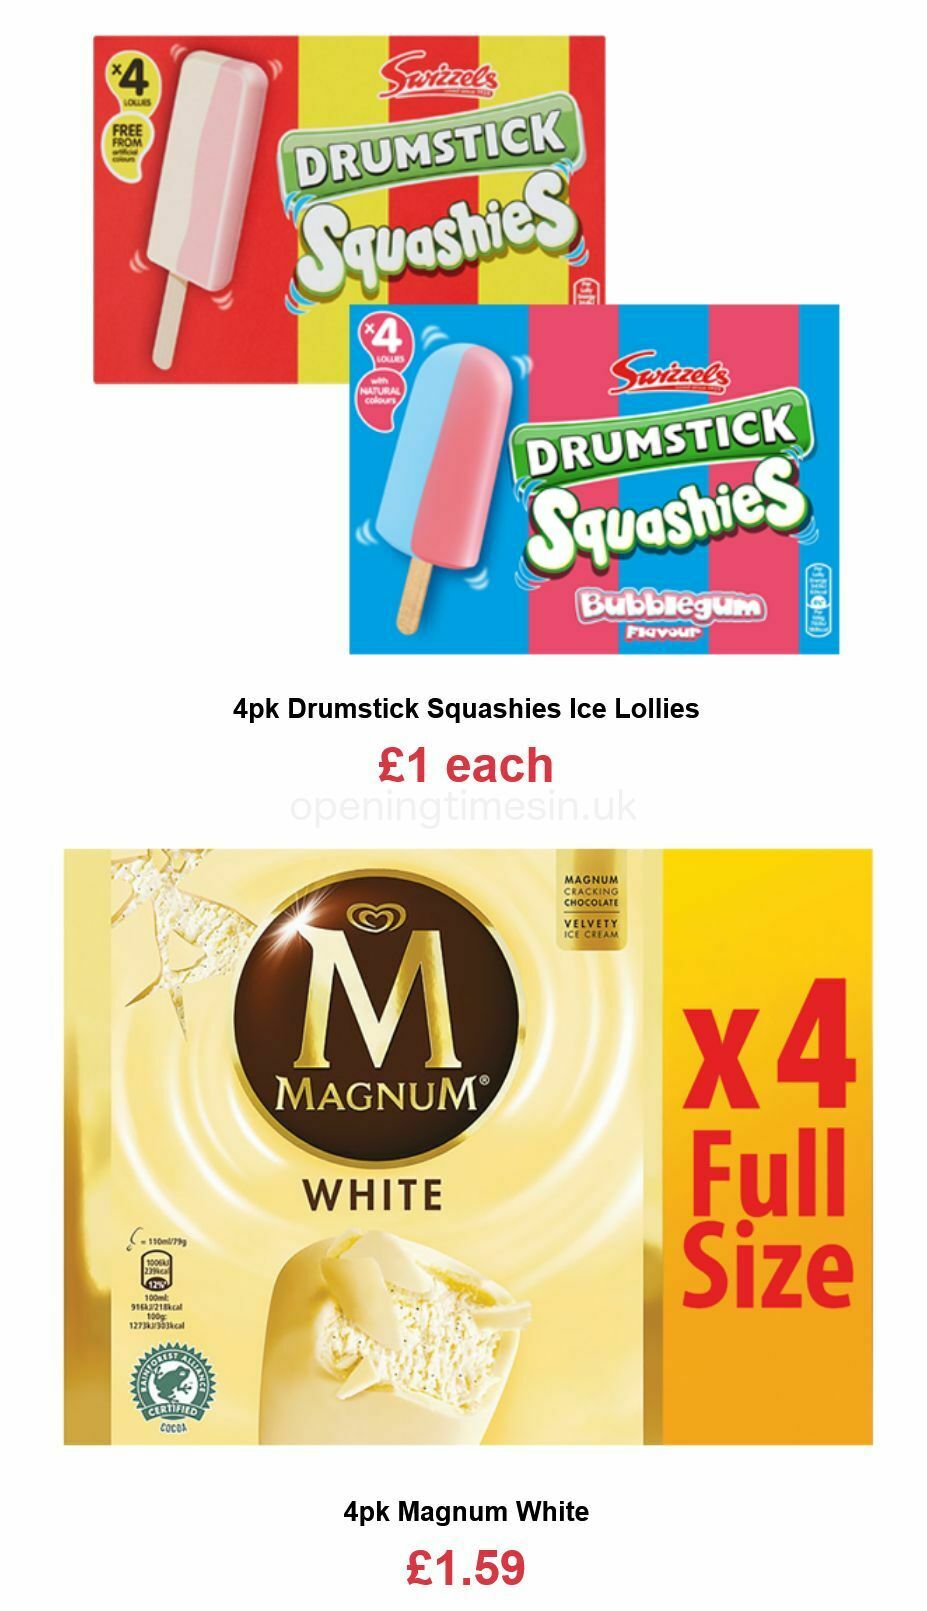 Farmfoods Offers from 14 June